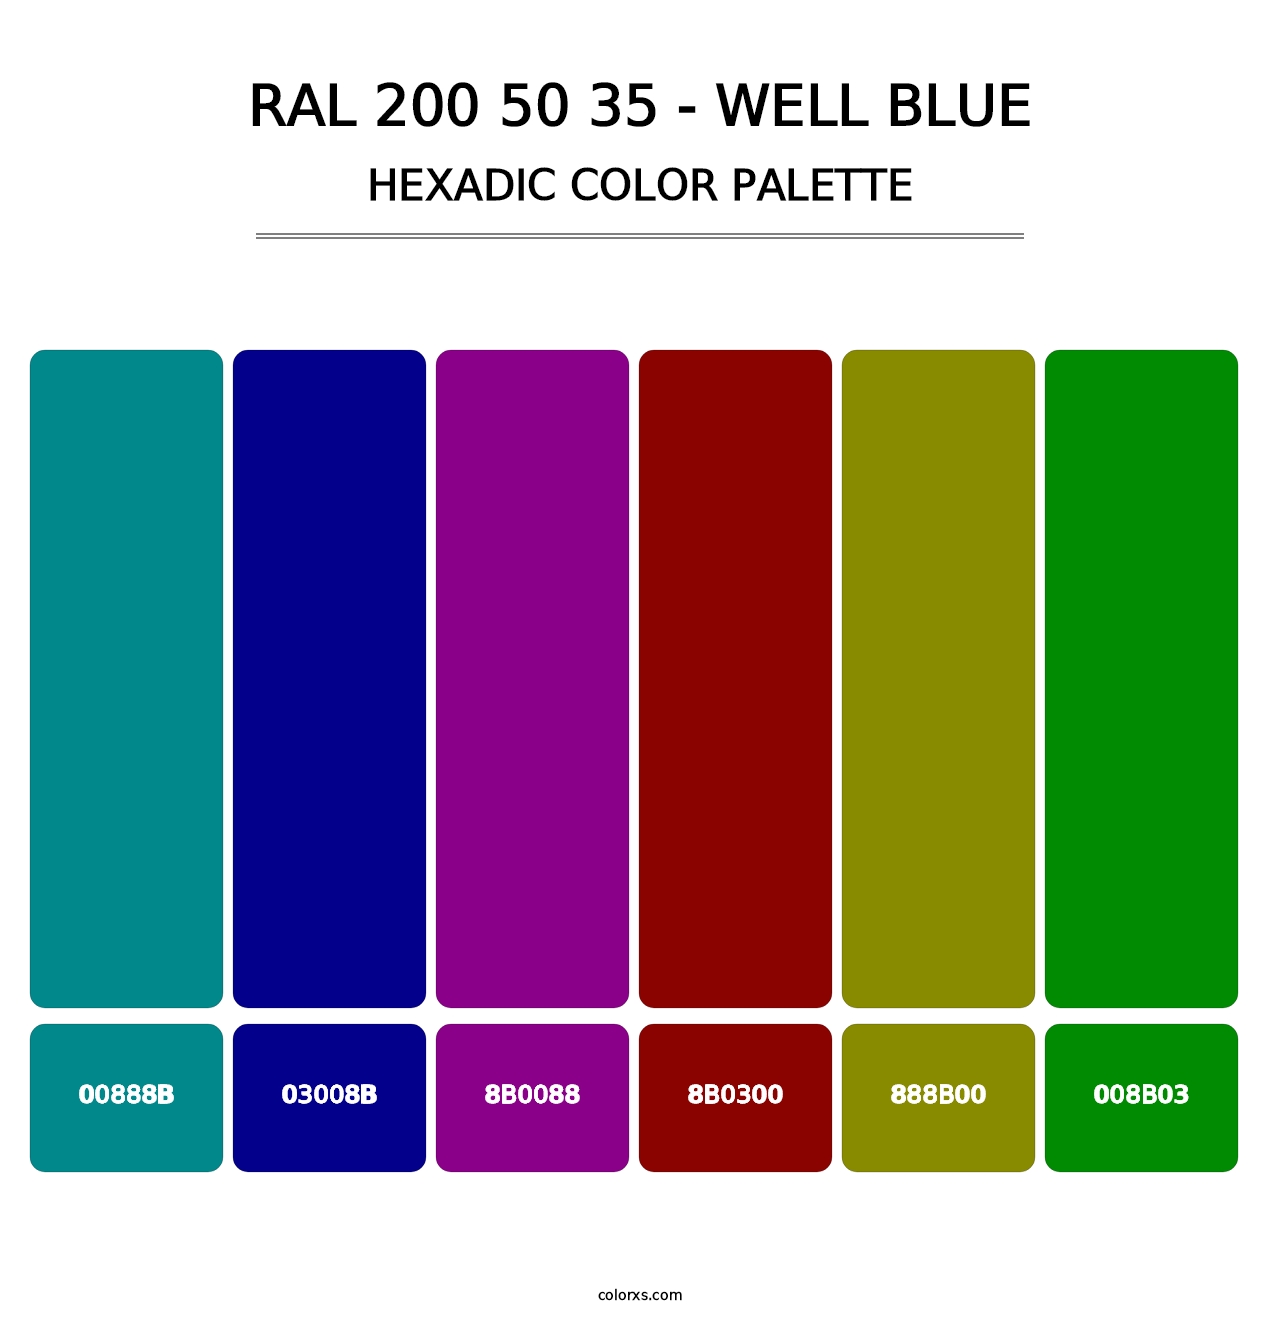 RAL 200 50 35 - Well Blue - Hexadic Color Palette